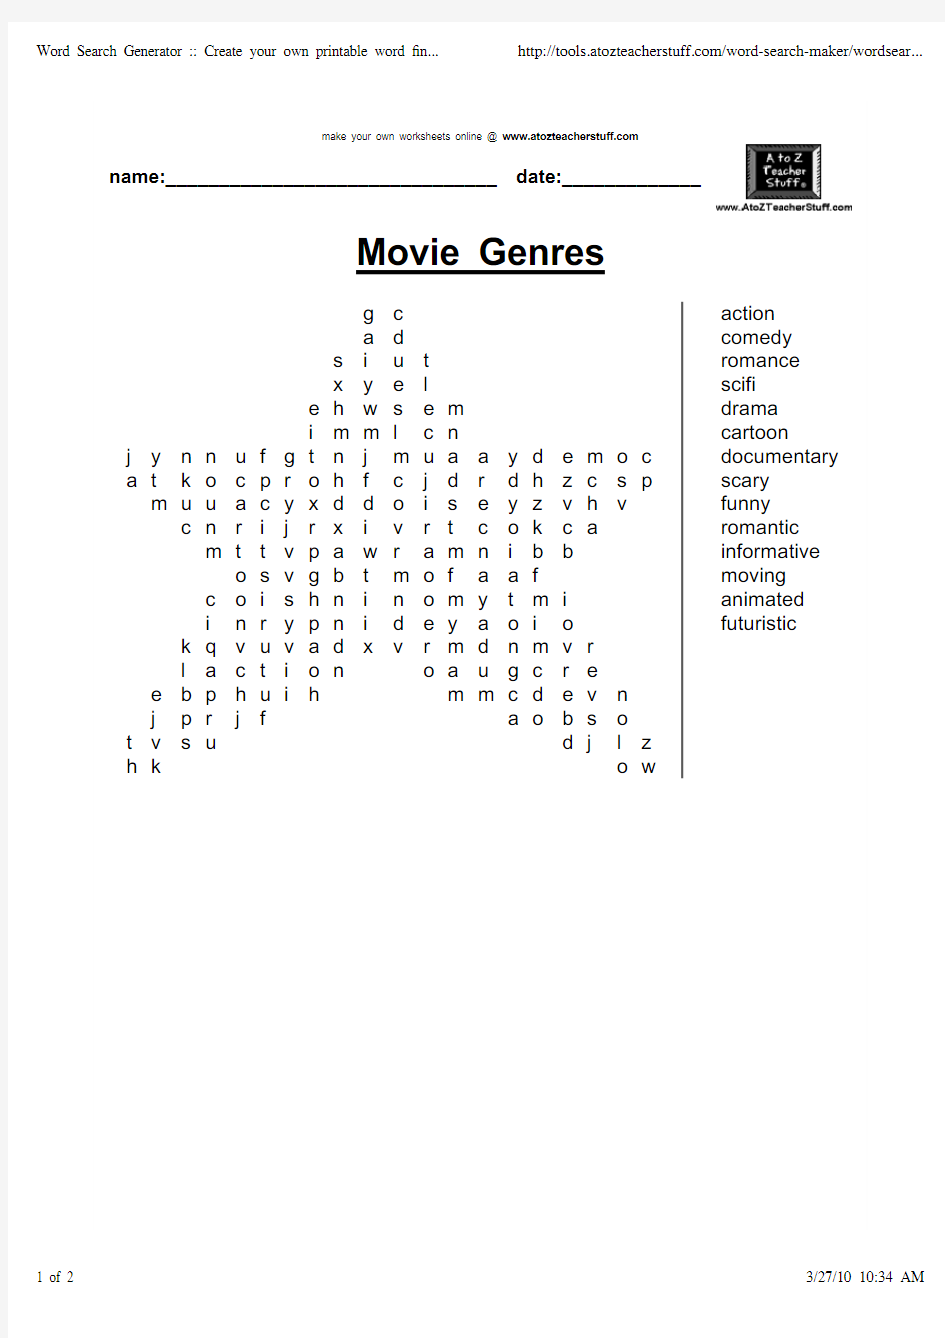 Word Search (movies)